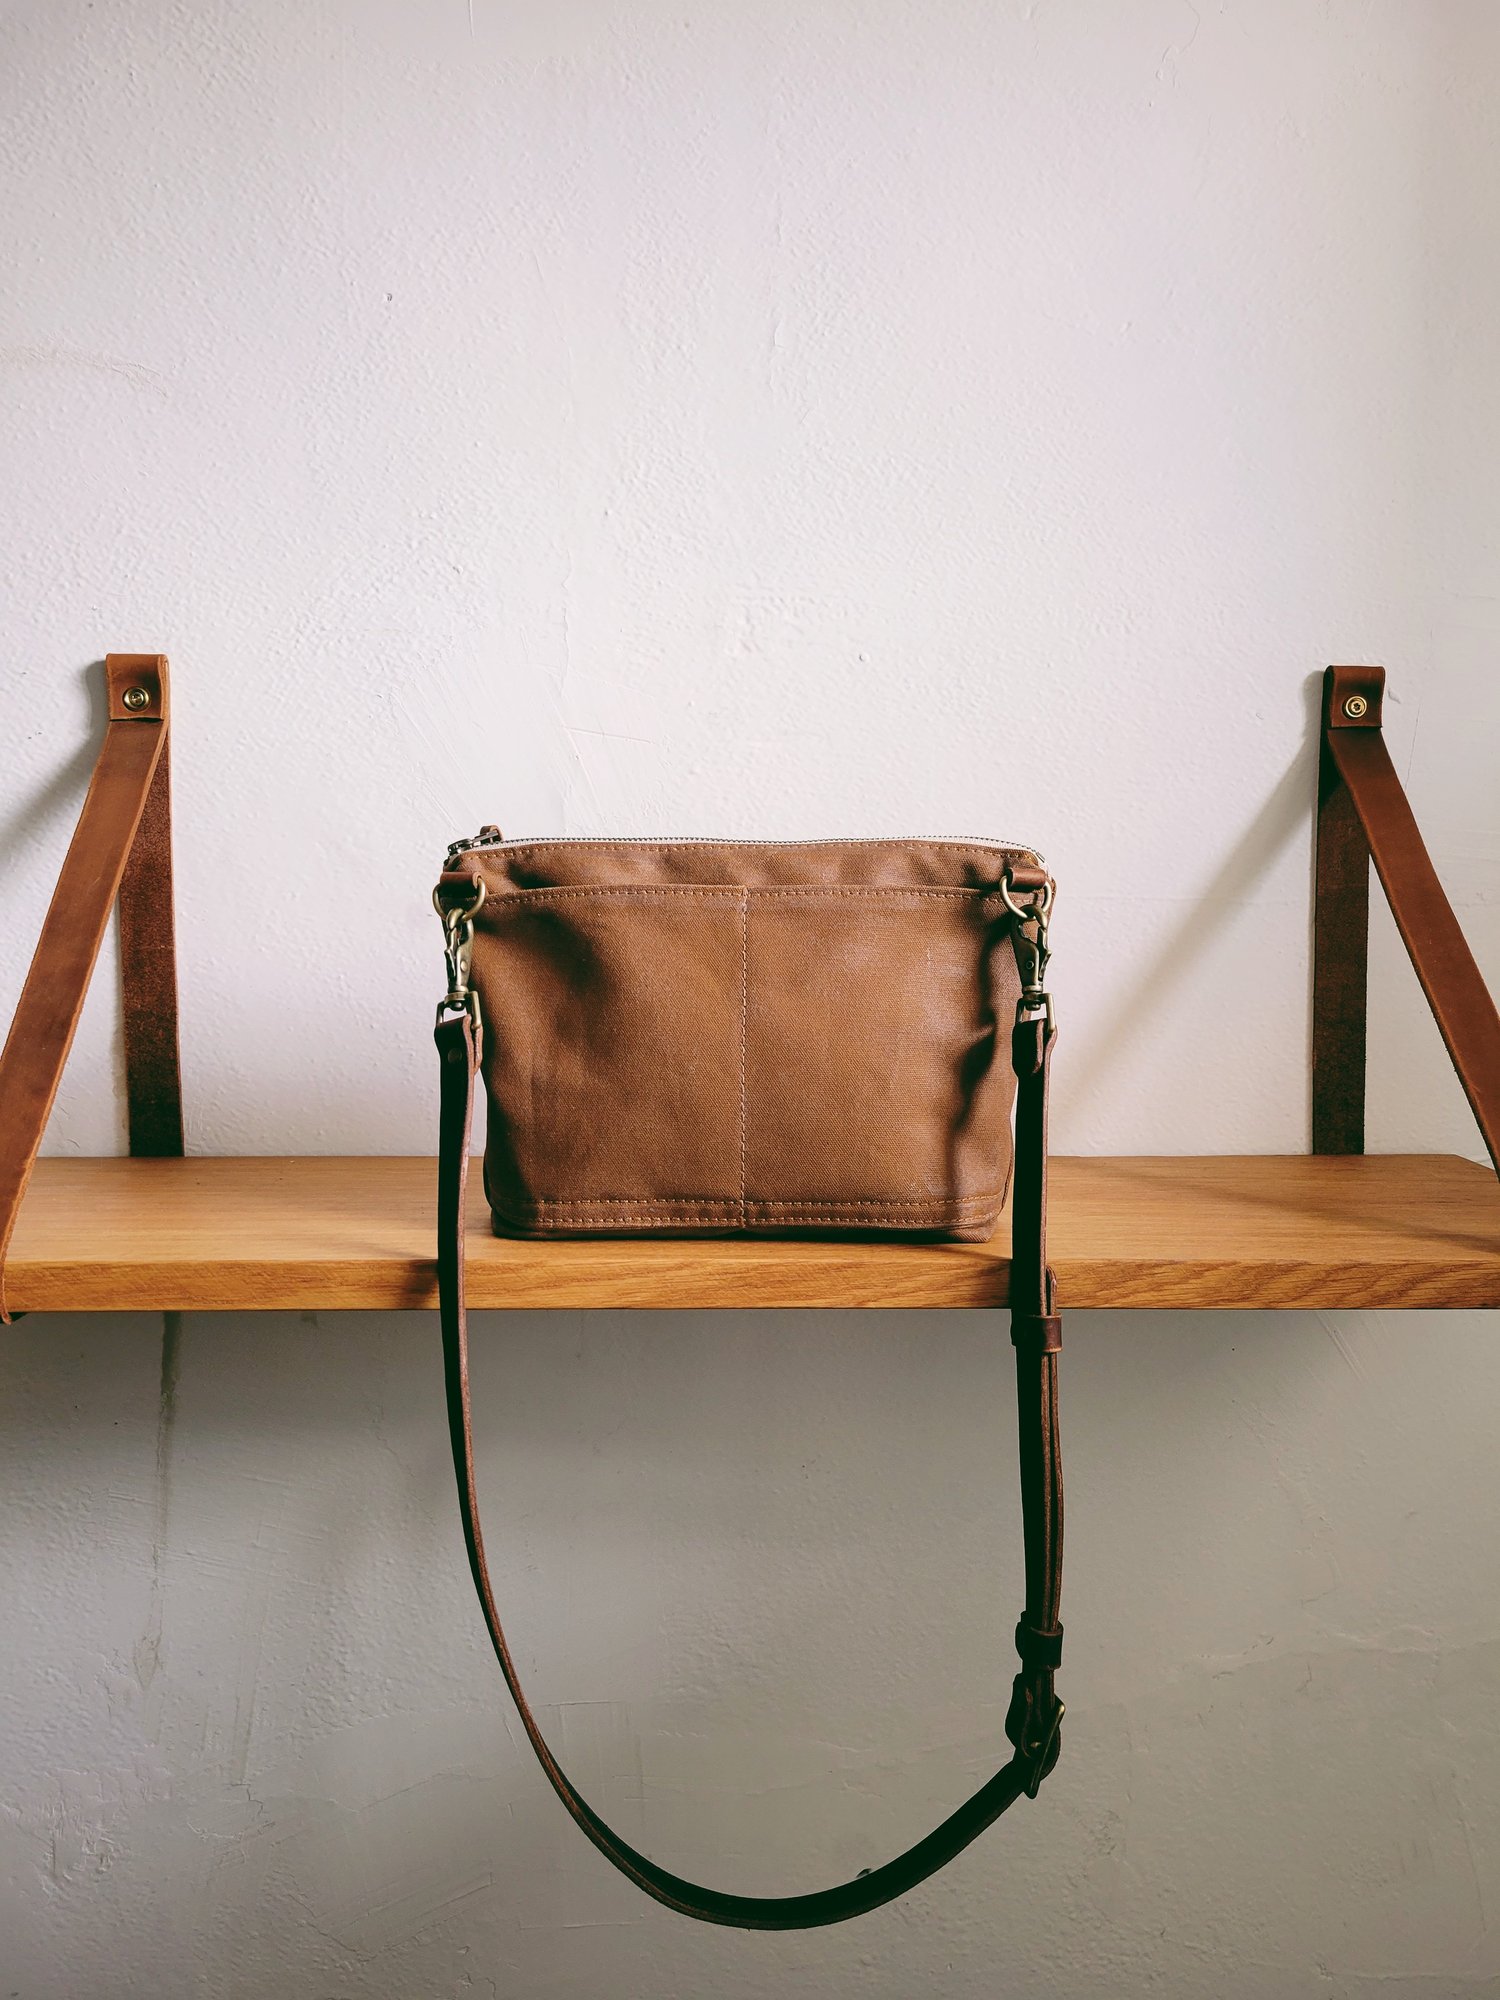 Waxed Canvas Day Bag / Small Messenger Bag / Musette / Handle 